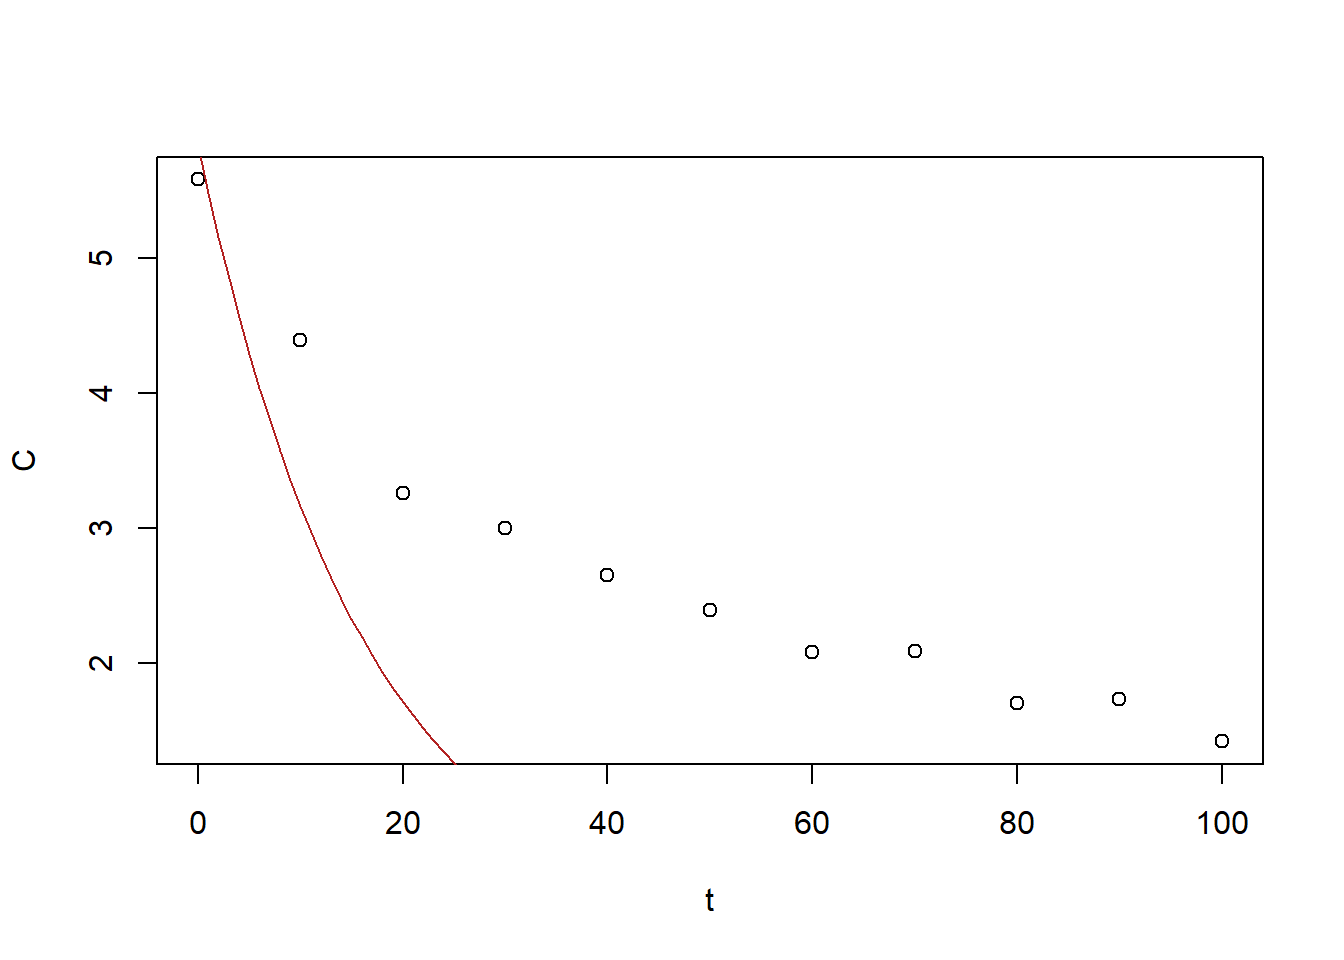 Fitted exponential with gradient descent, as the line of best fit, as the solution is superimposed.